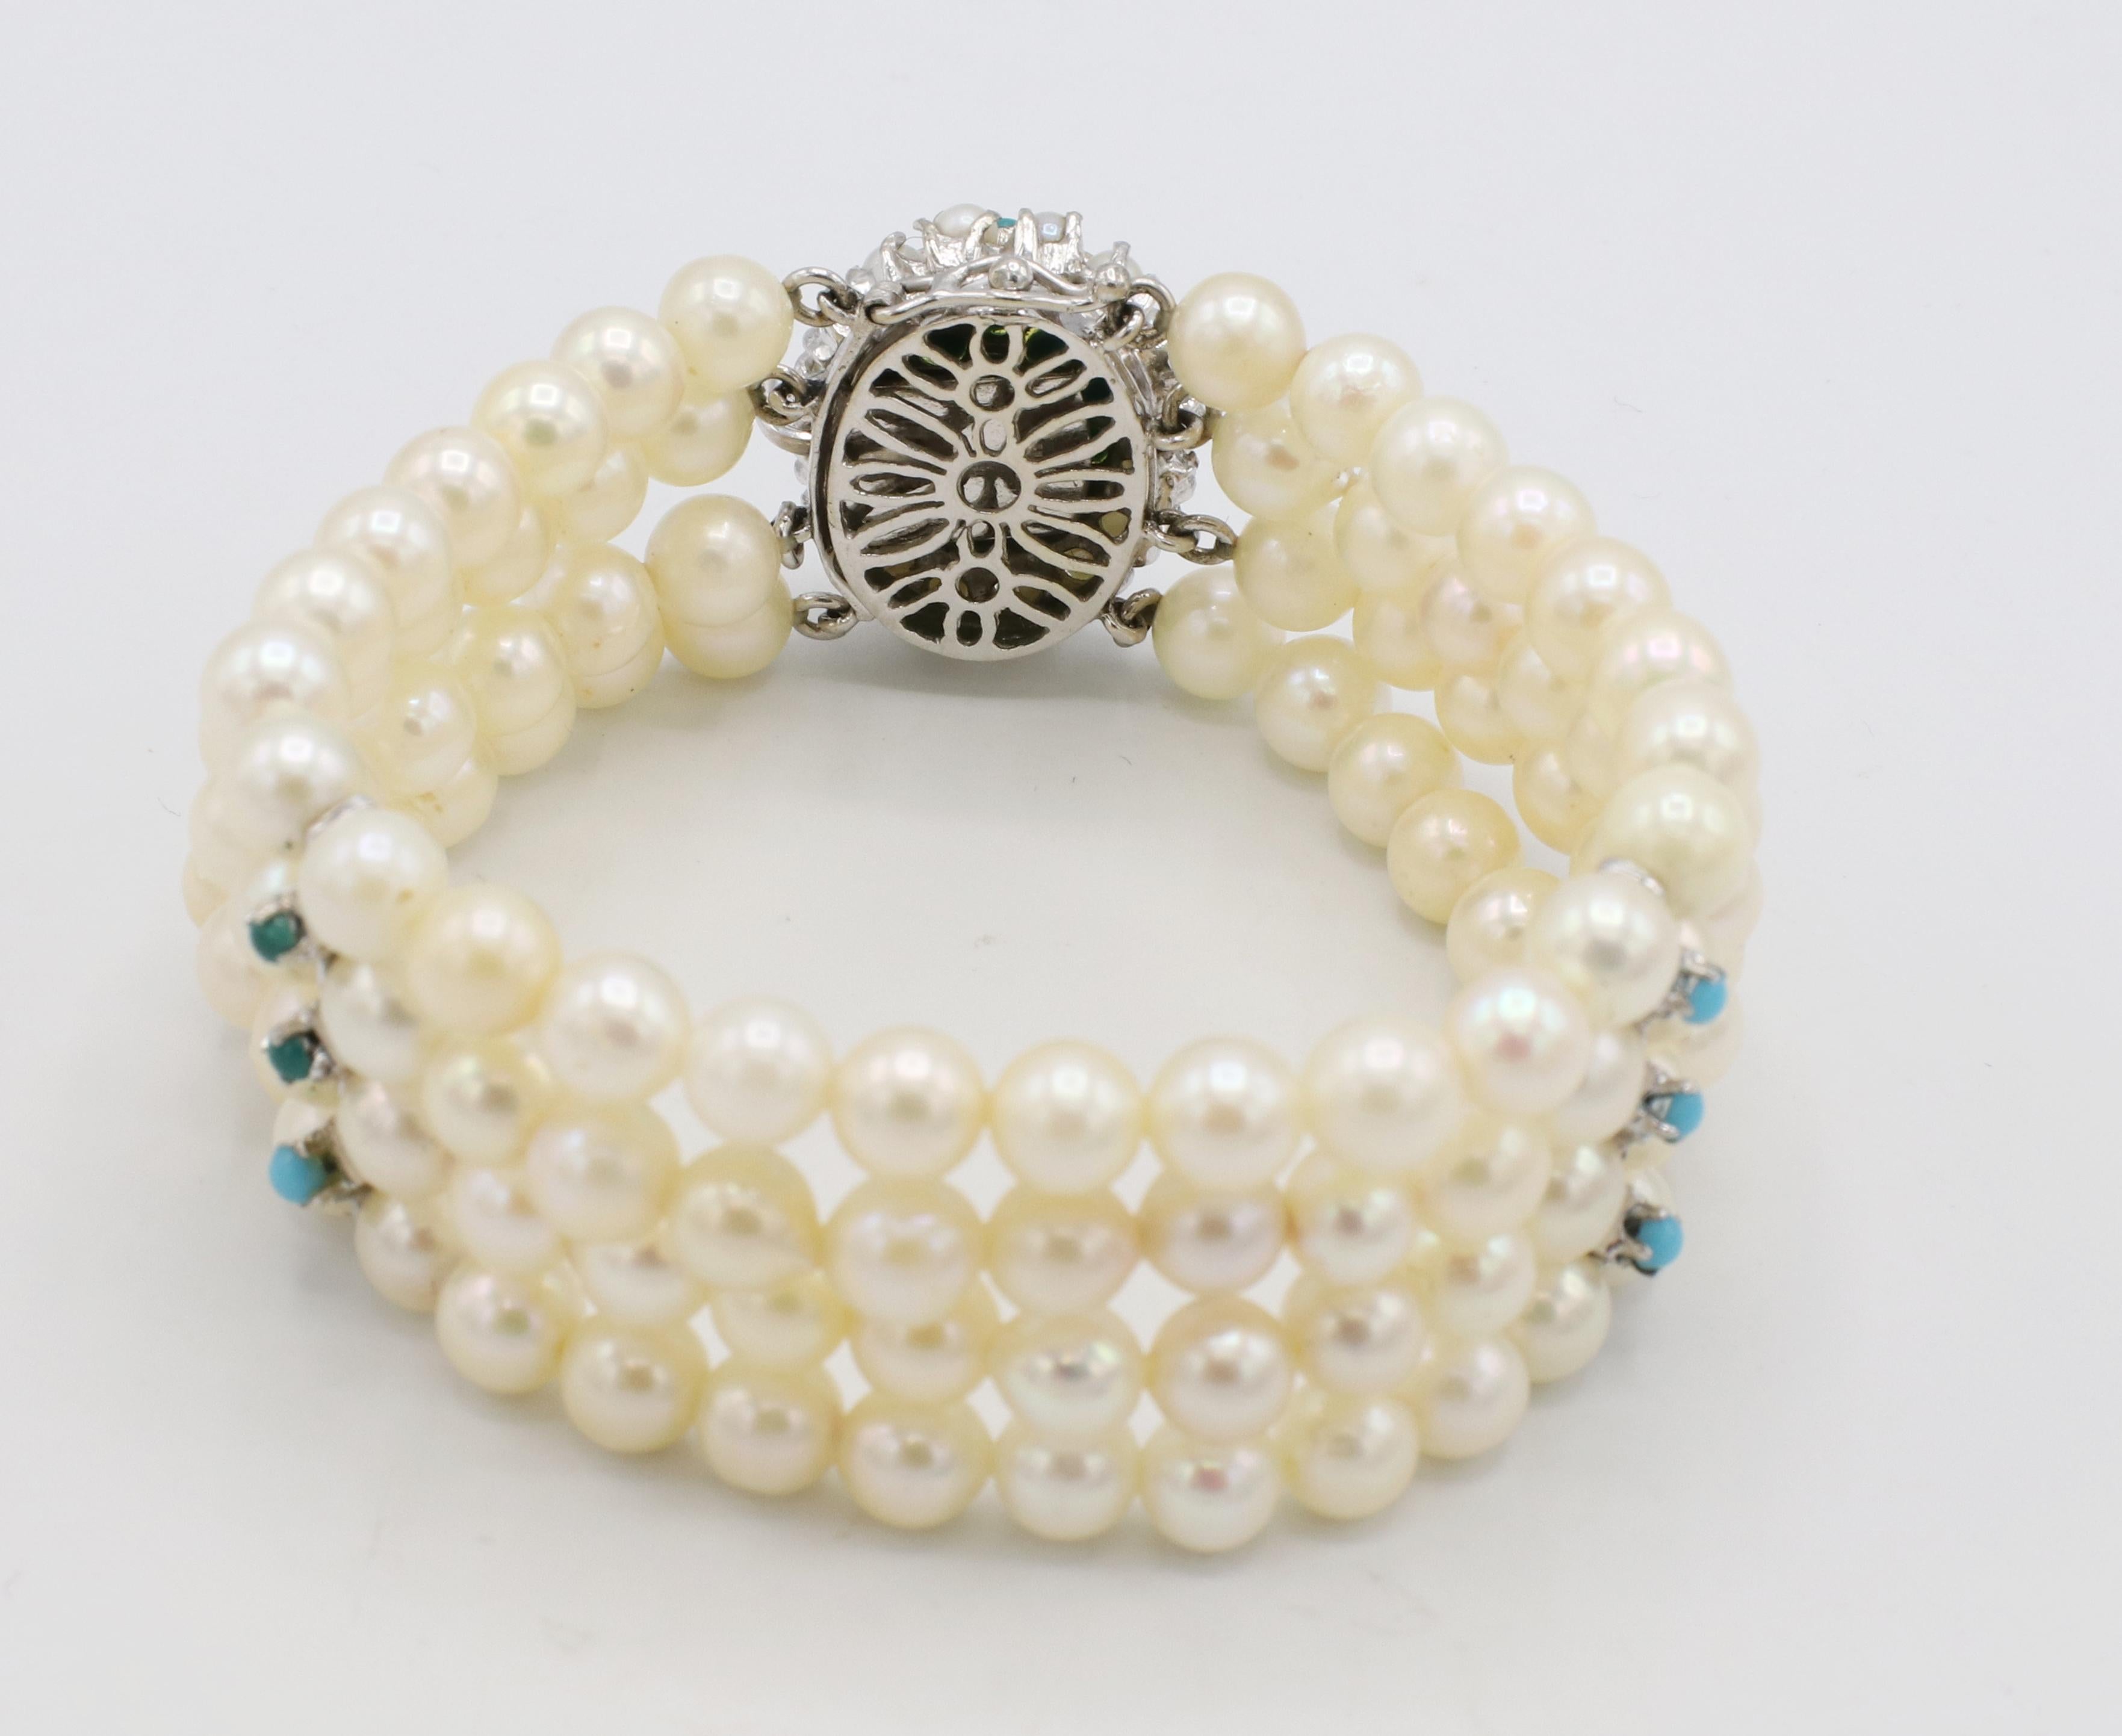 Retro 14 Karat White Gold 4-Row Pearl Bracelet With Turquoise Stations & Clasp For Sale